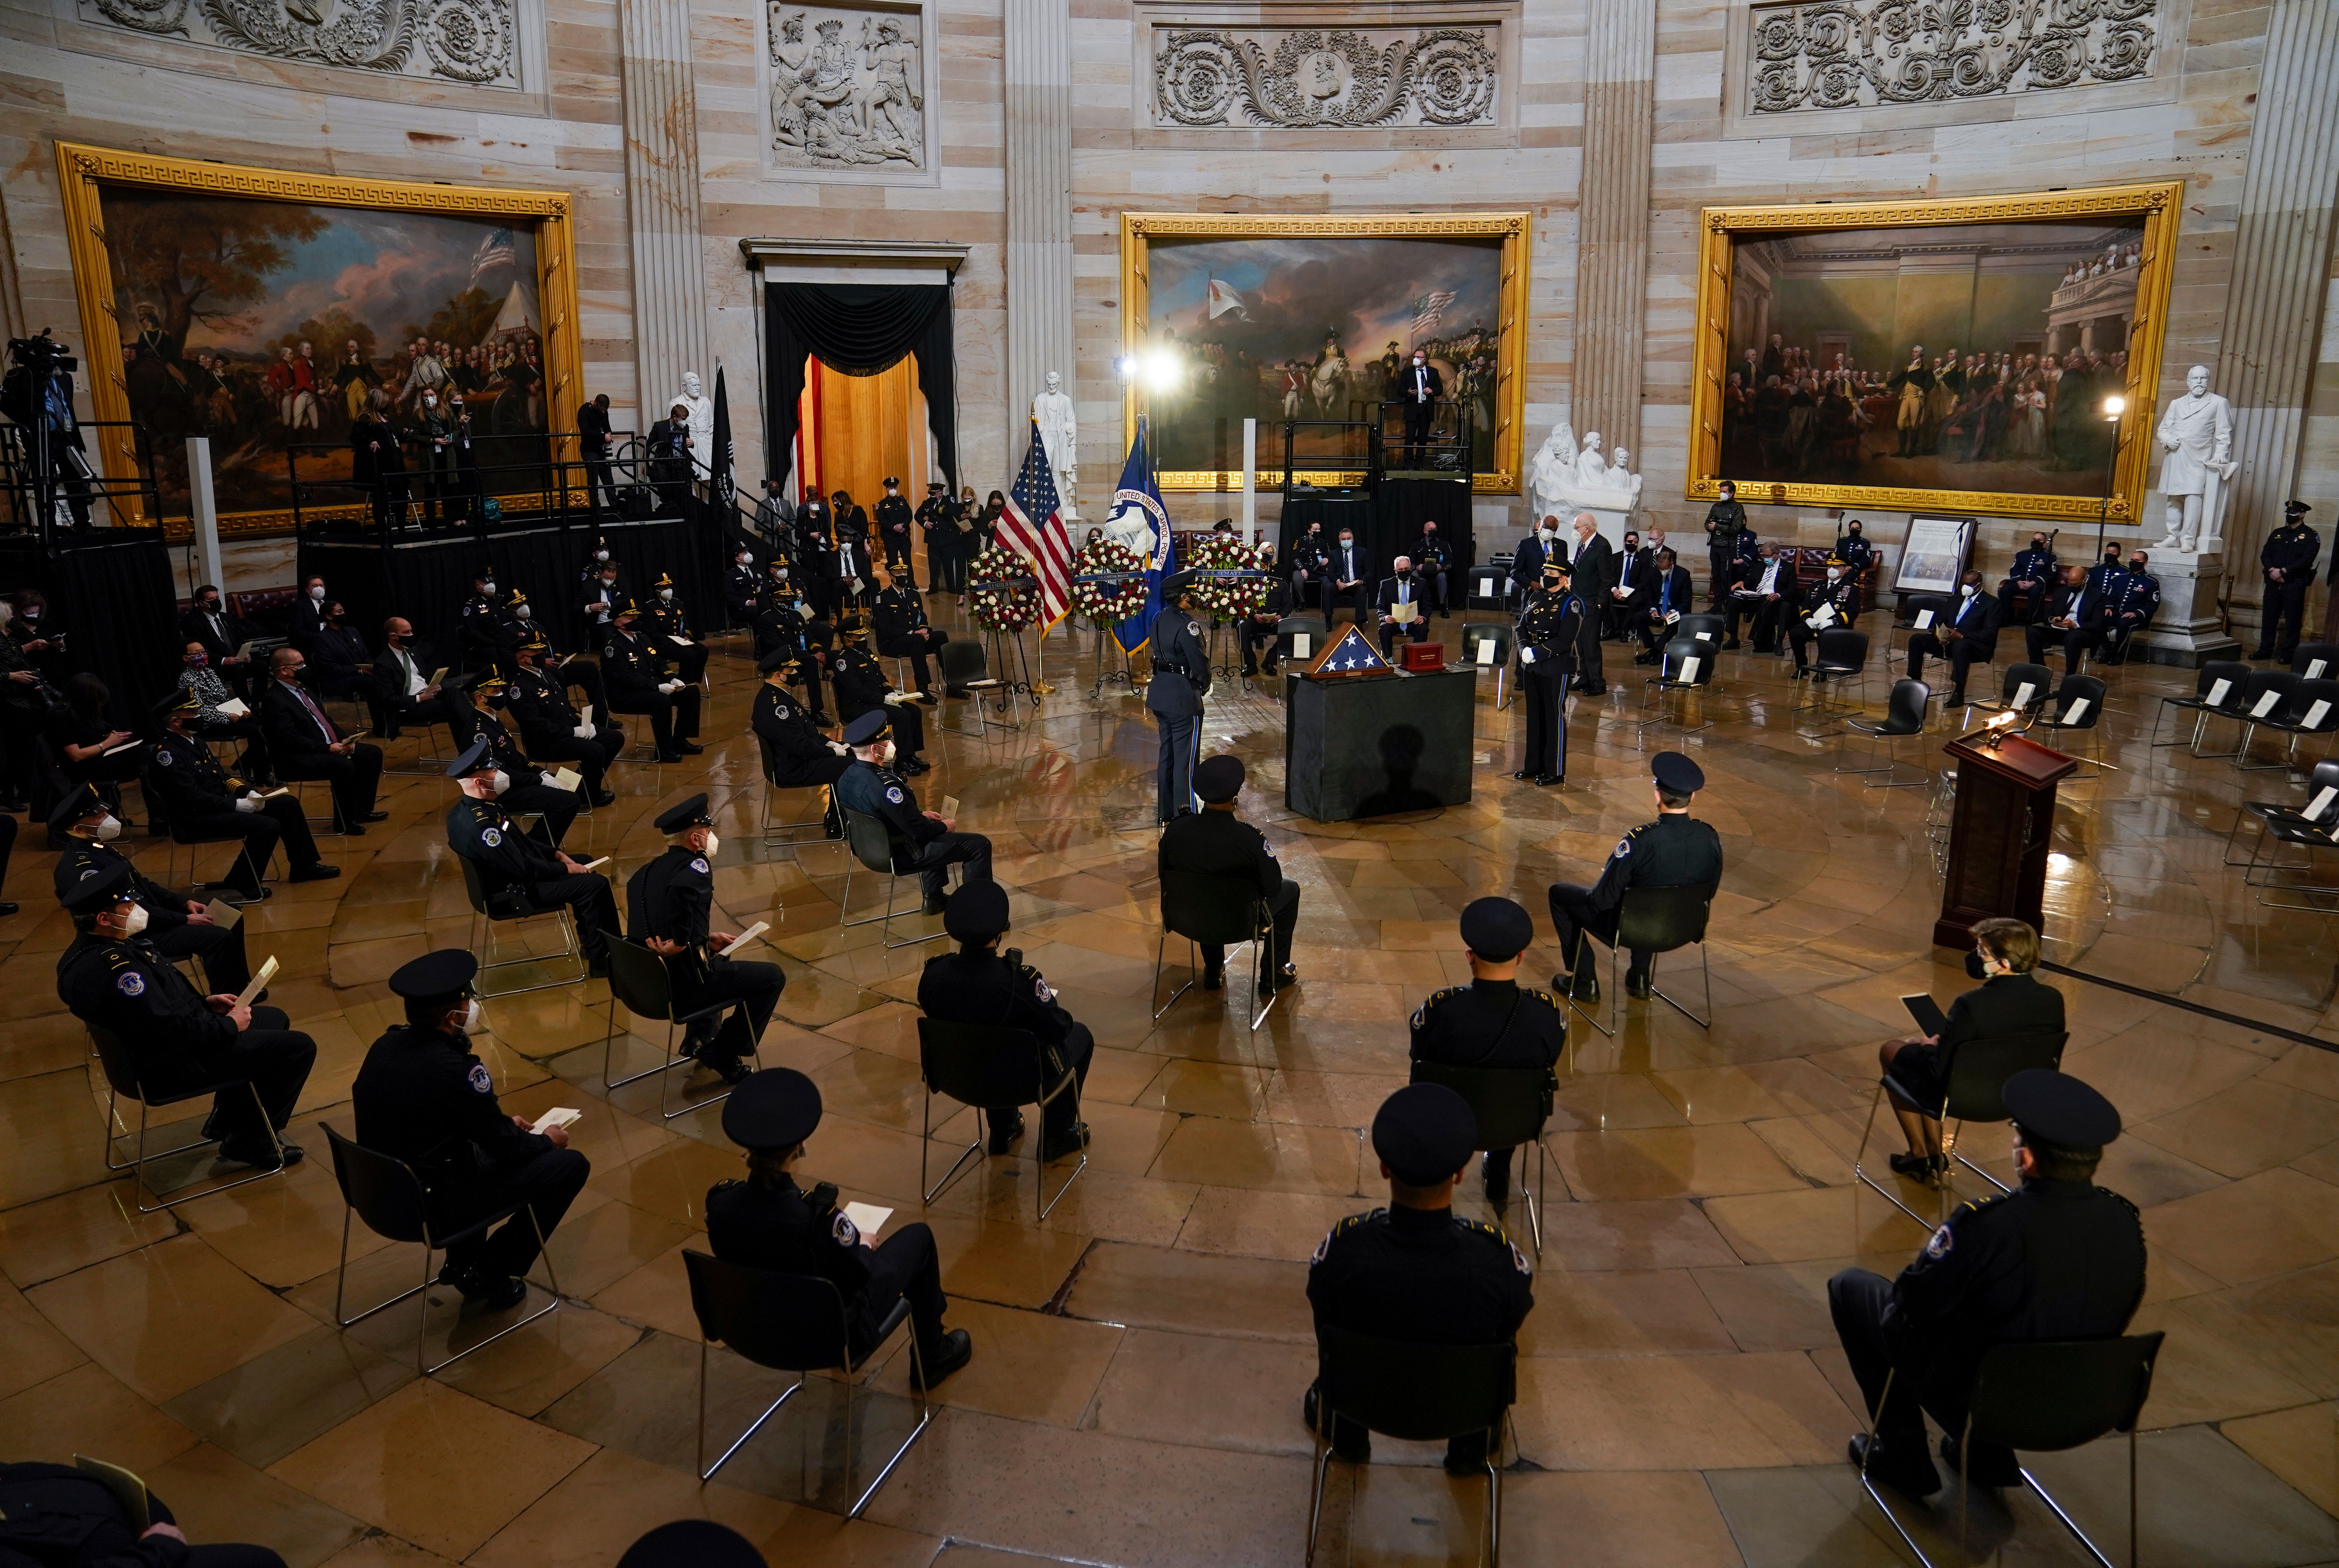 Guests are seated in the Capitol Rotunda on February 3 before a ceremony to honor Officer Brian Sicknick.